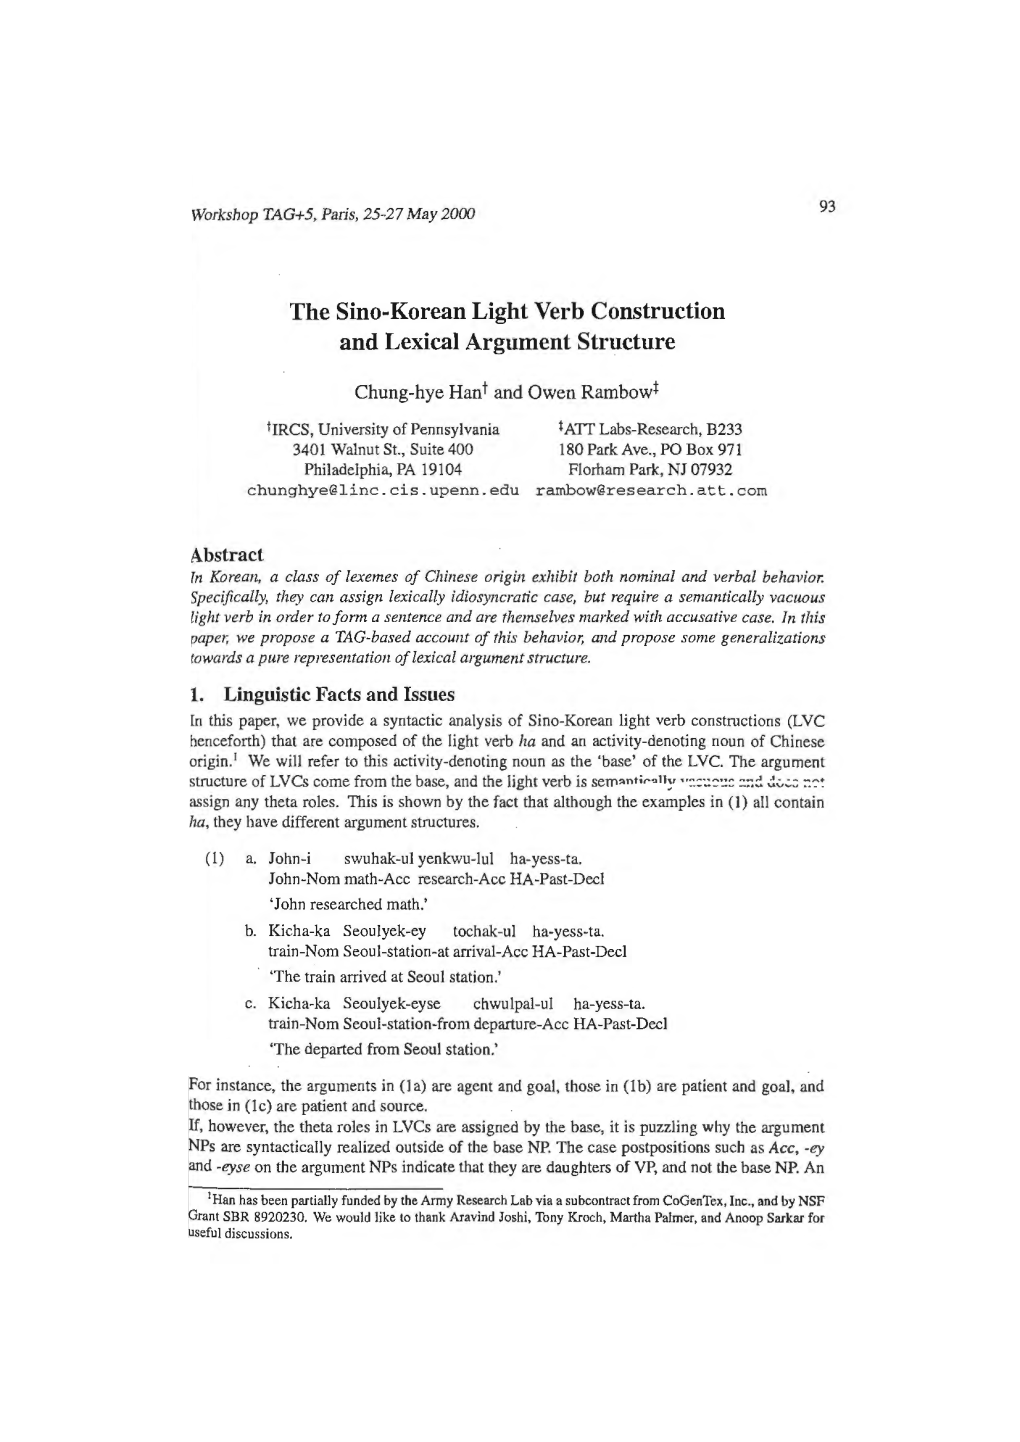 The Sino-Korean Light Verb Construction and Lexical Argument Structure